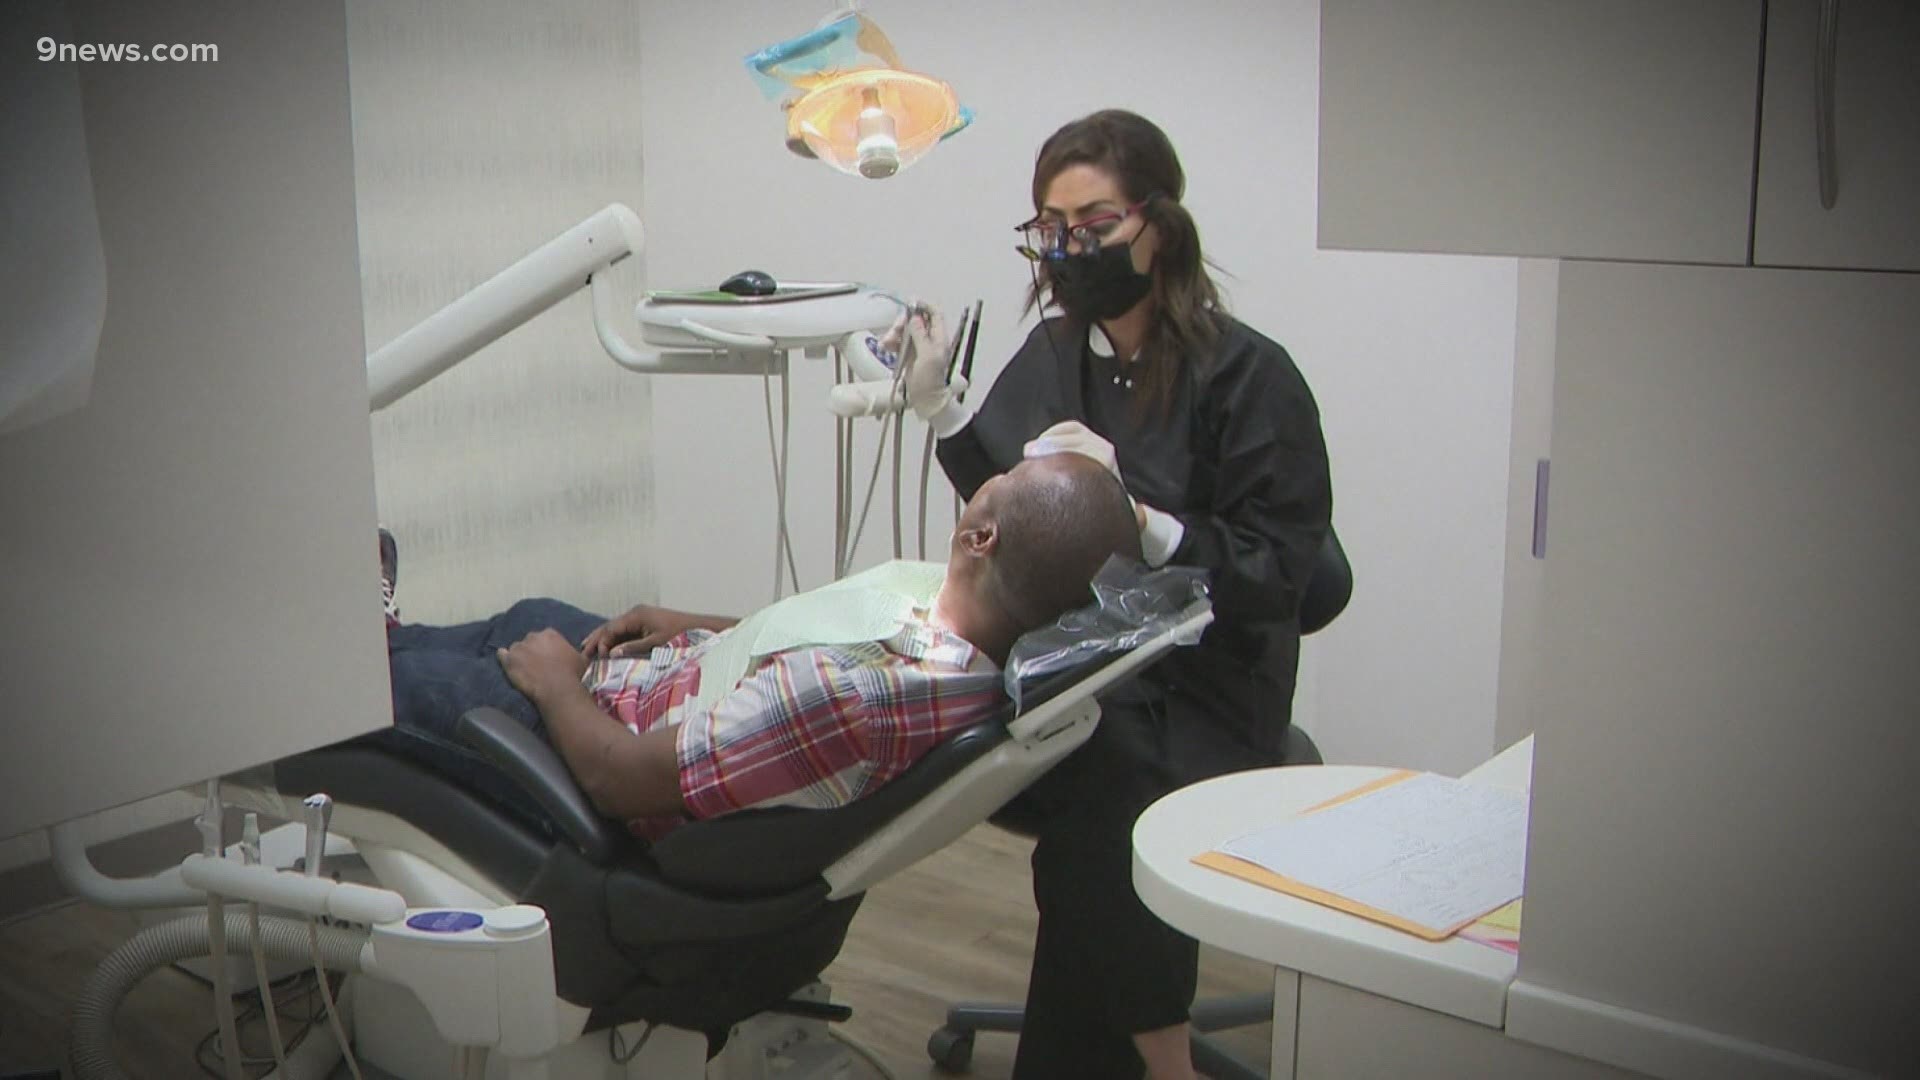 One Centennial dentist said he's also seeing jaw pain issues. He and doctors also shared a technique to help people fall asleep quickly.